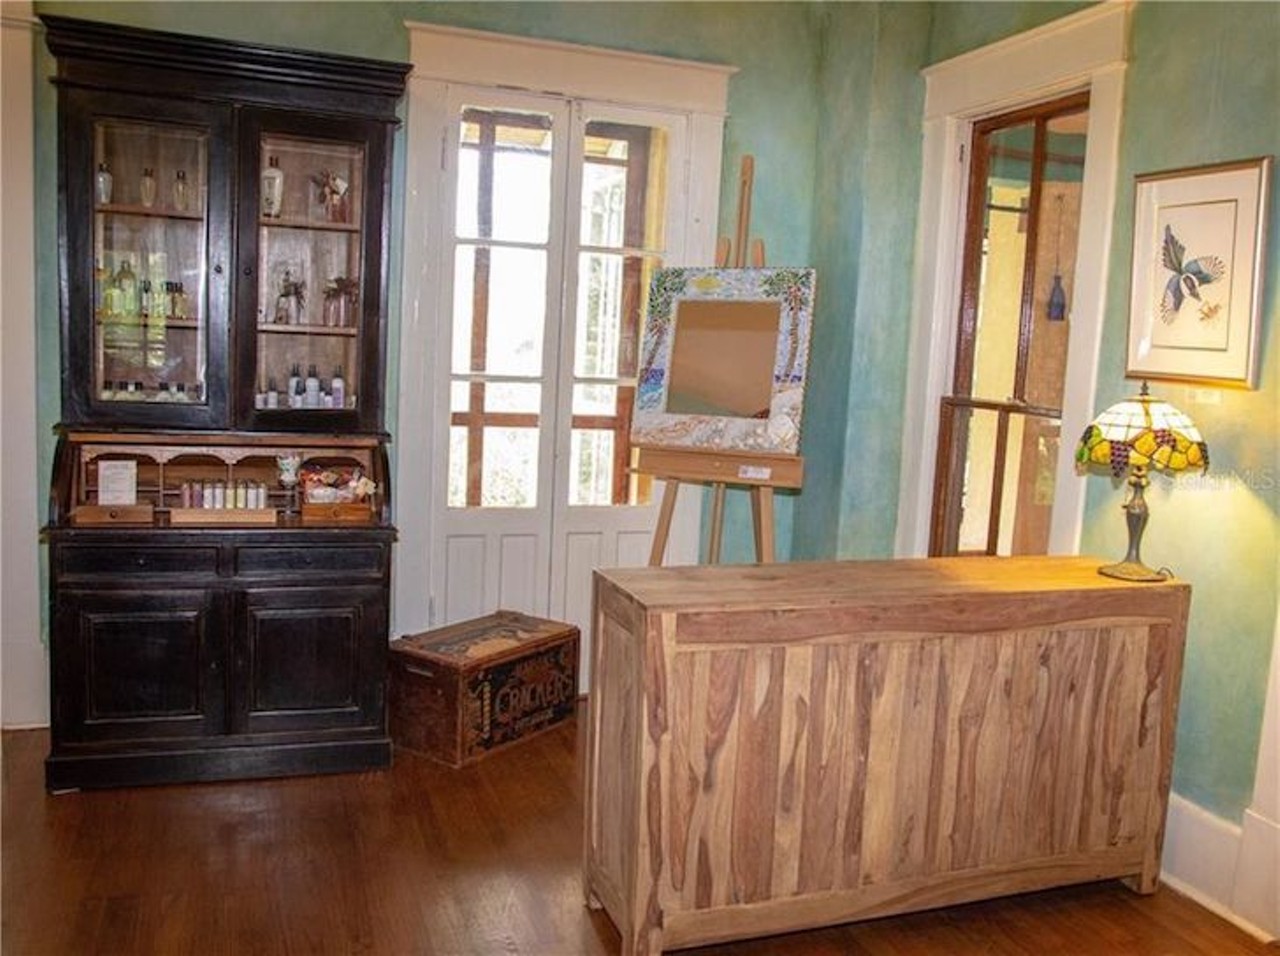 This 19th century Oakland bed and breakfast can be yours for under a million dollars